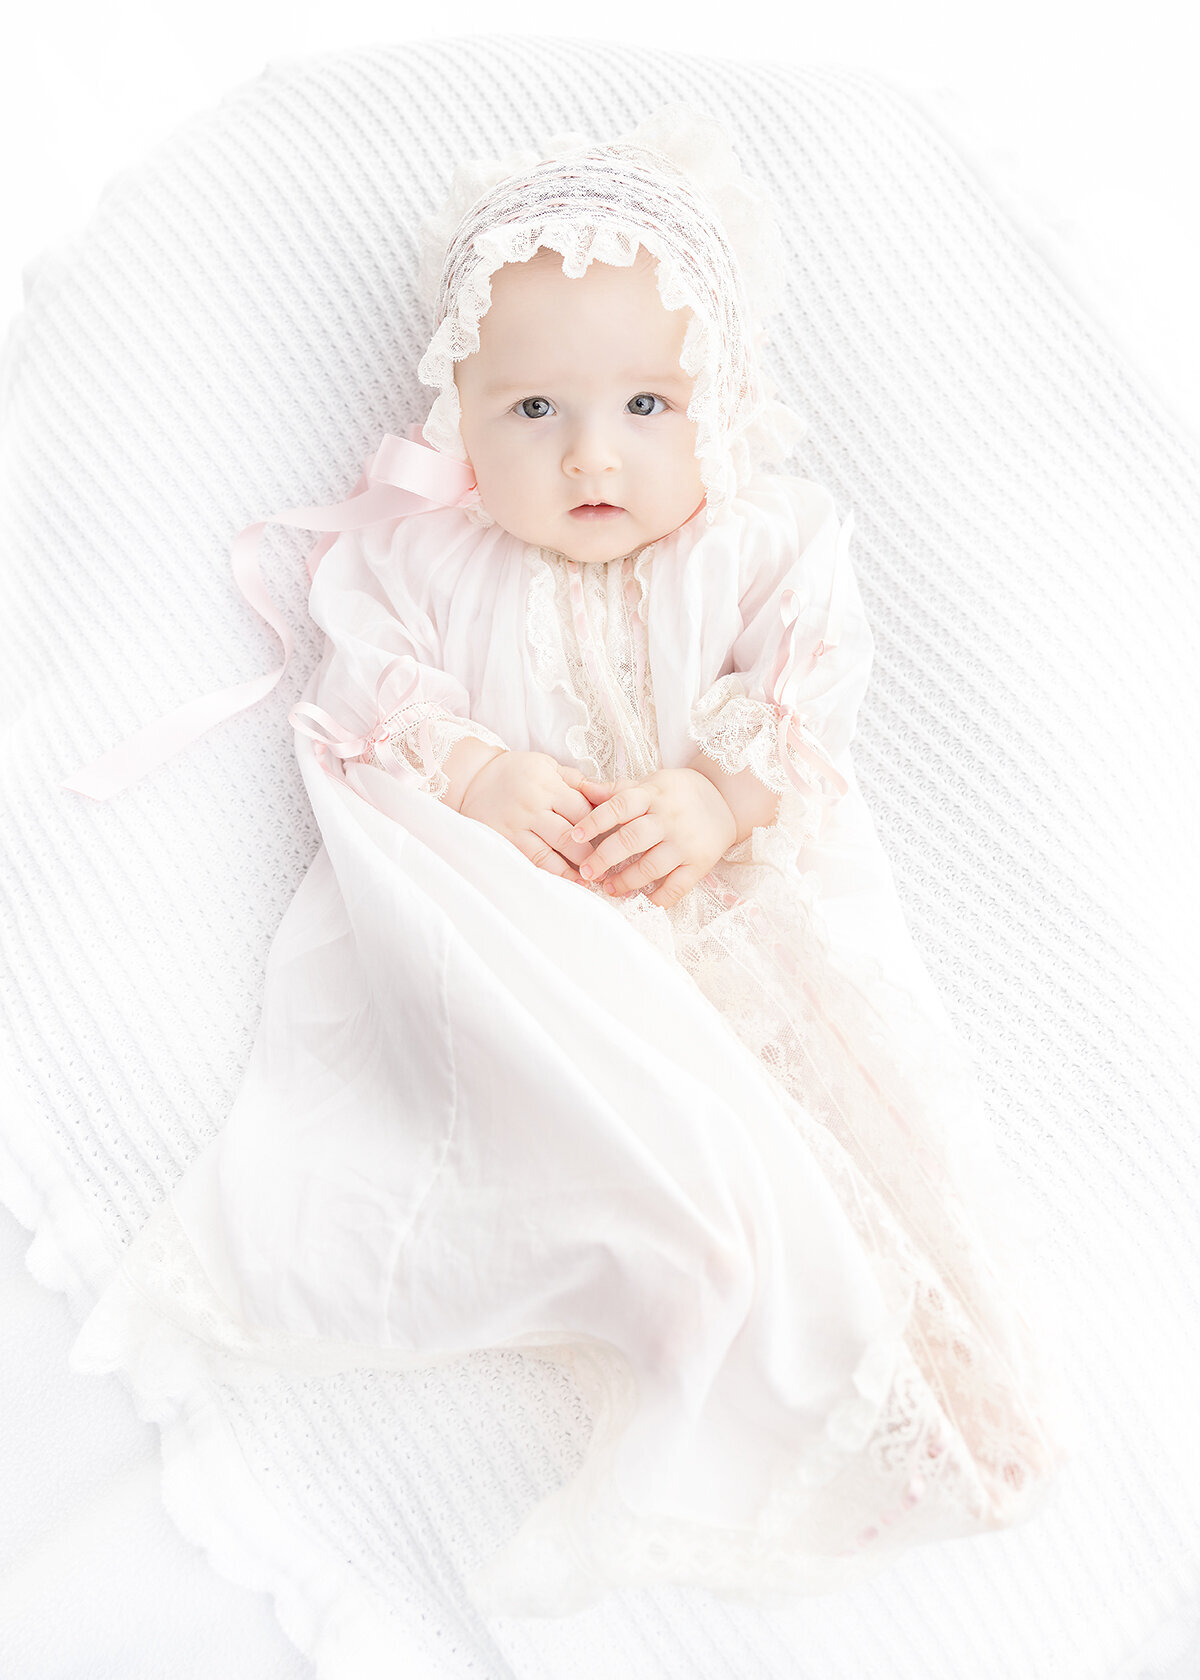 4 month old baby girl photographed in vintage heirloom christening gown in studio